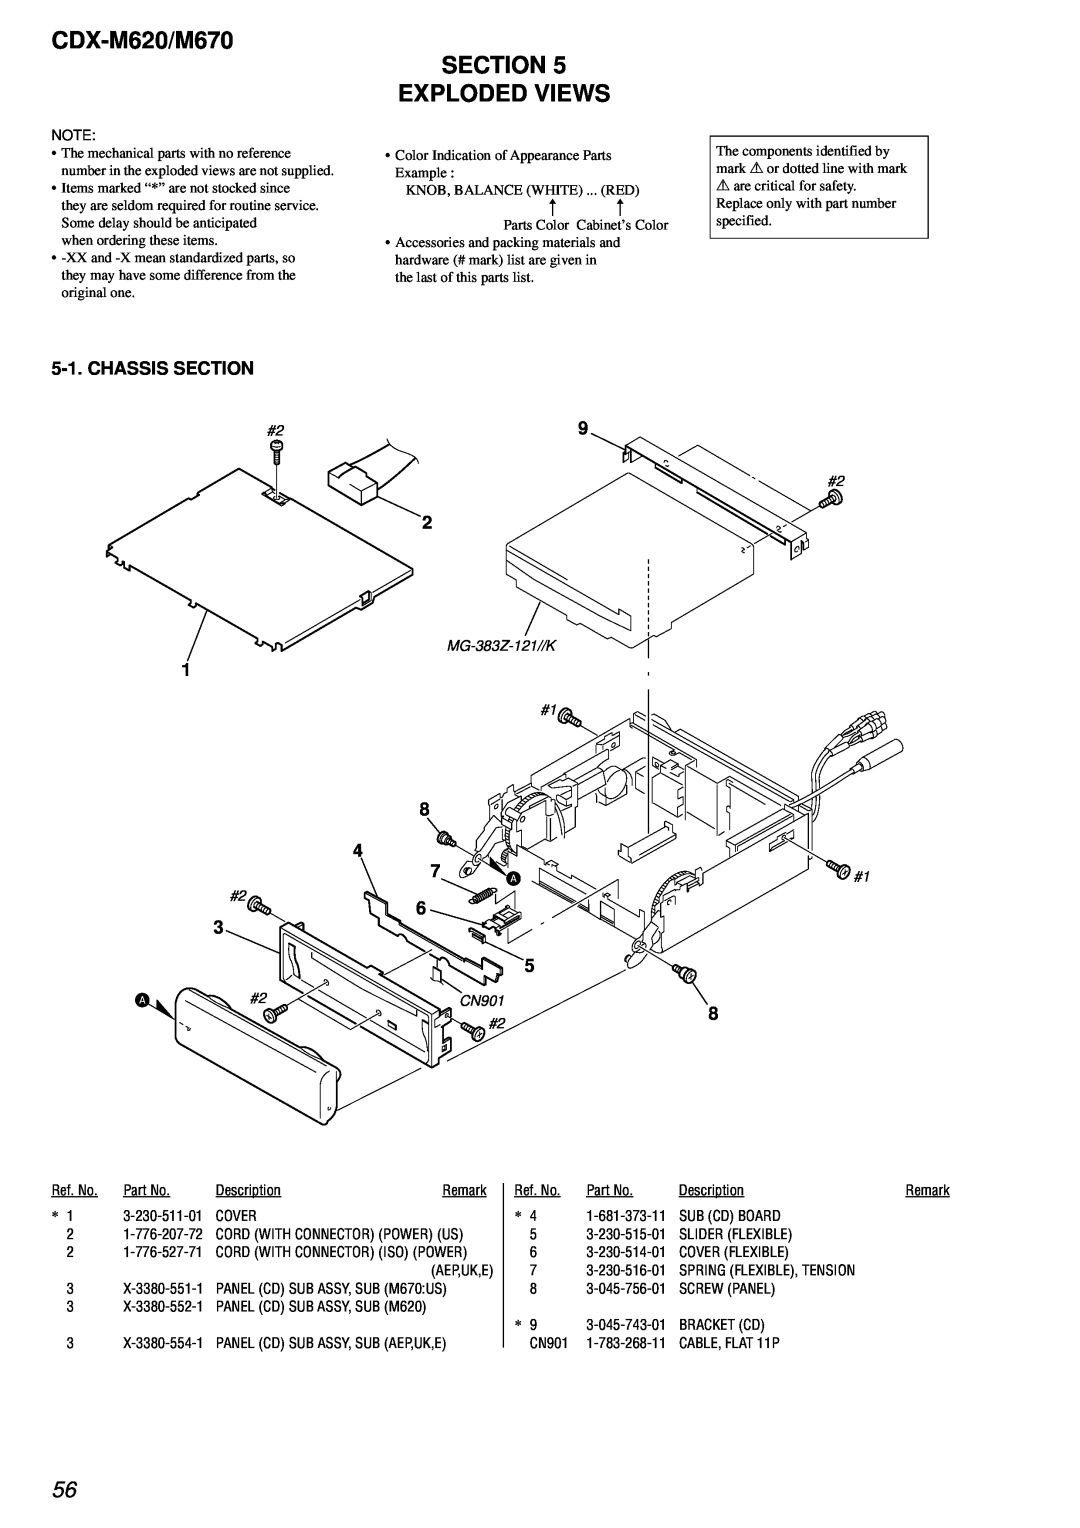 Sony Ericsson service manual Section Exploded Views, Chassis Section, CDX-M620/M670, MG-383Z-121//K, CN901 